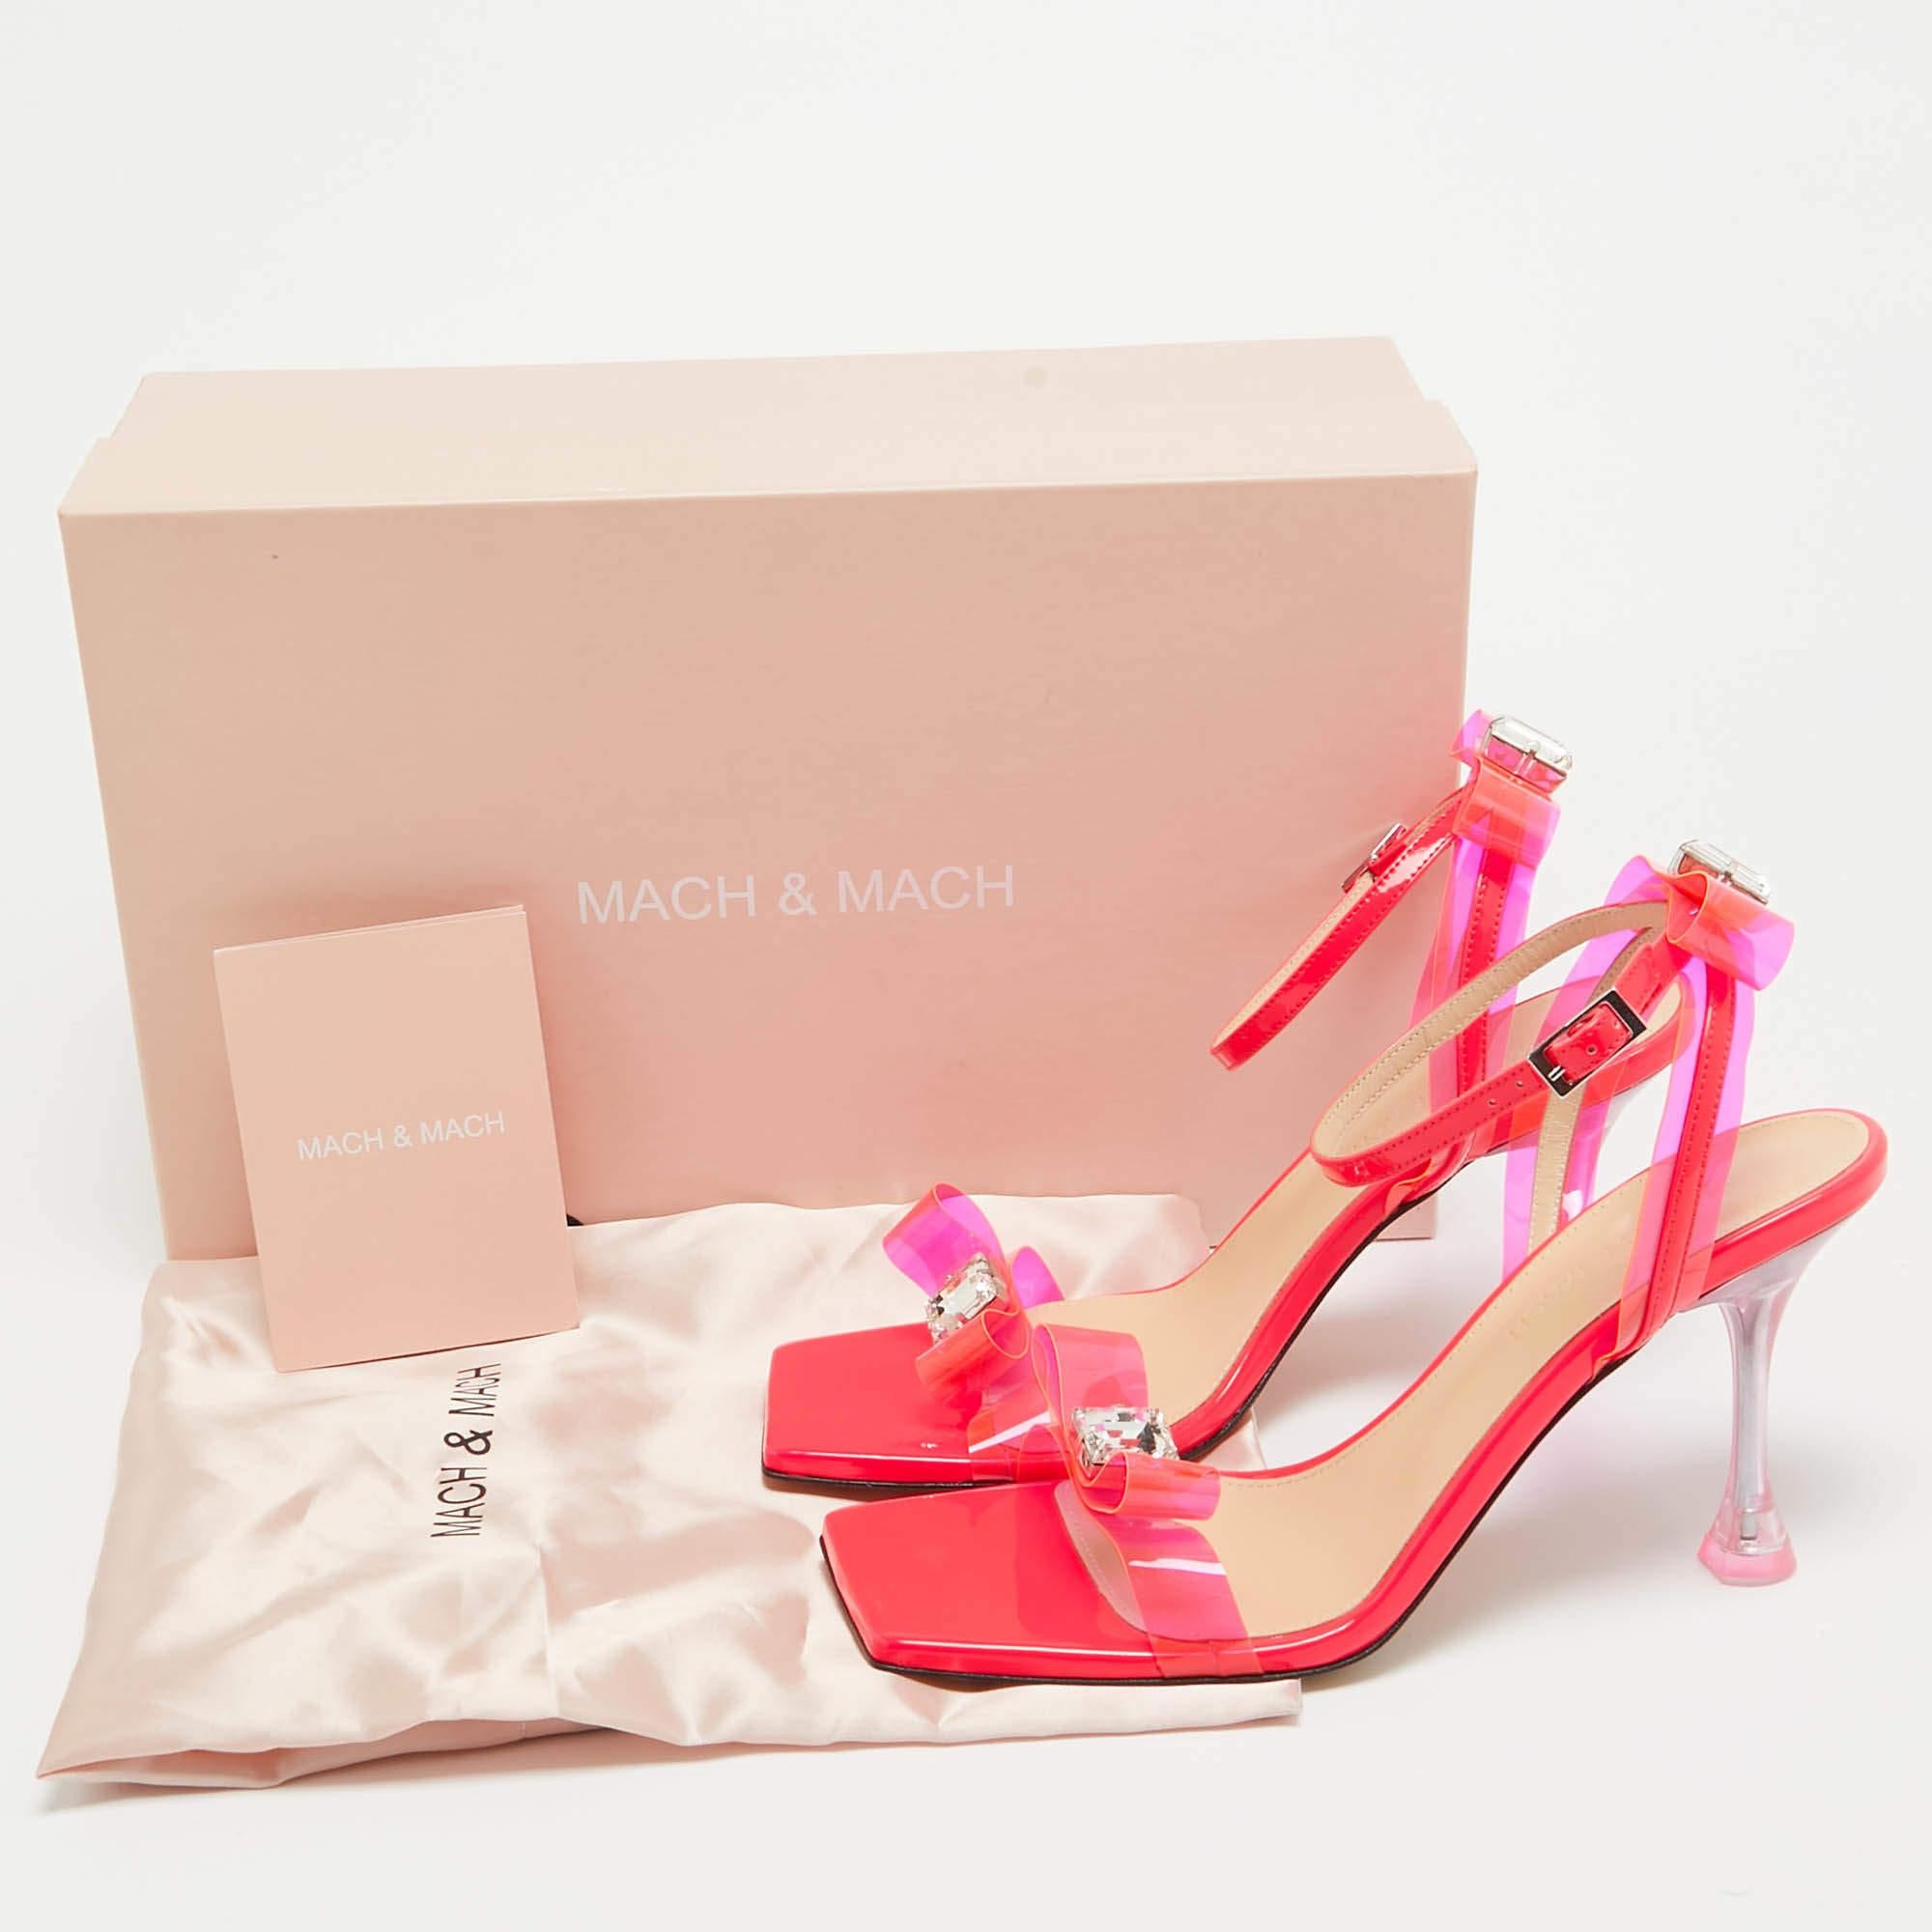 Mach & Mach Neon Pink PVC and Patent Leather French Bow Square Sandals Size 38.5 For Sale 4